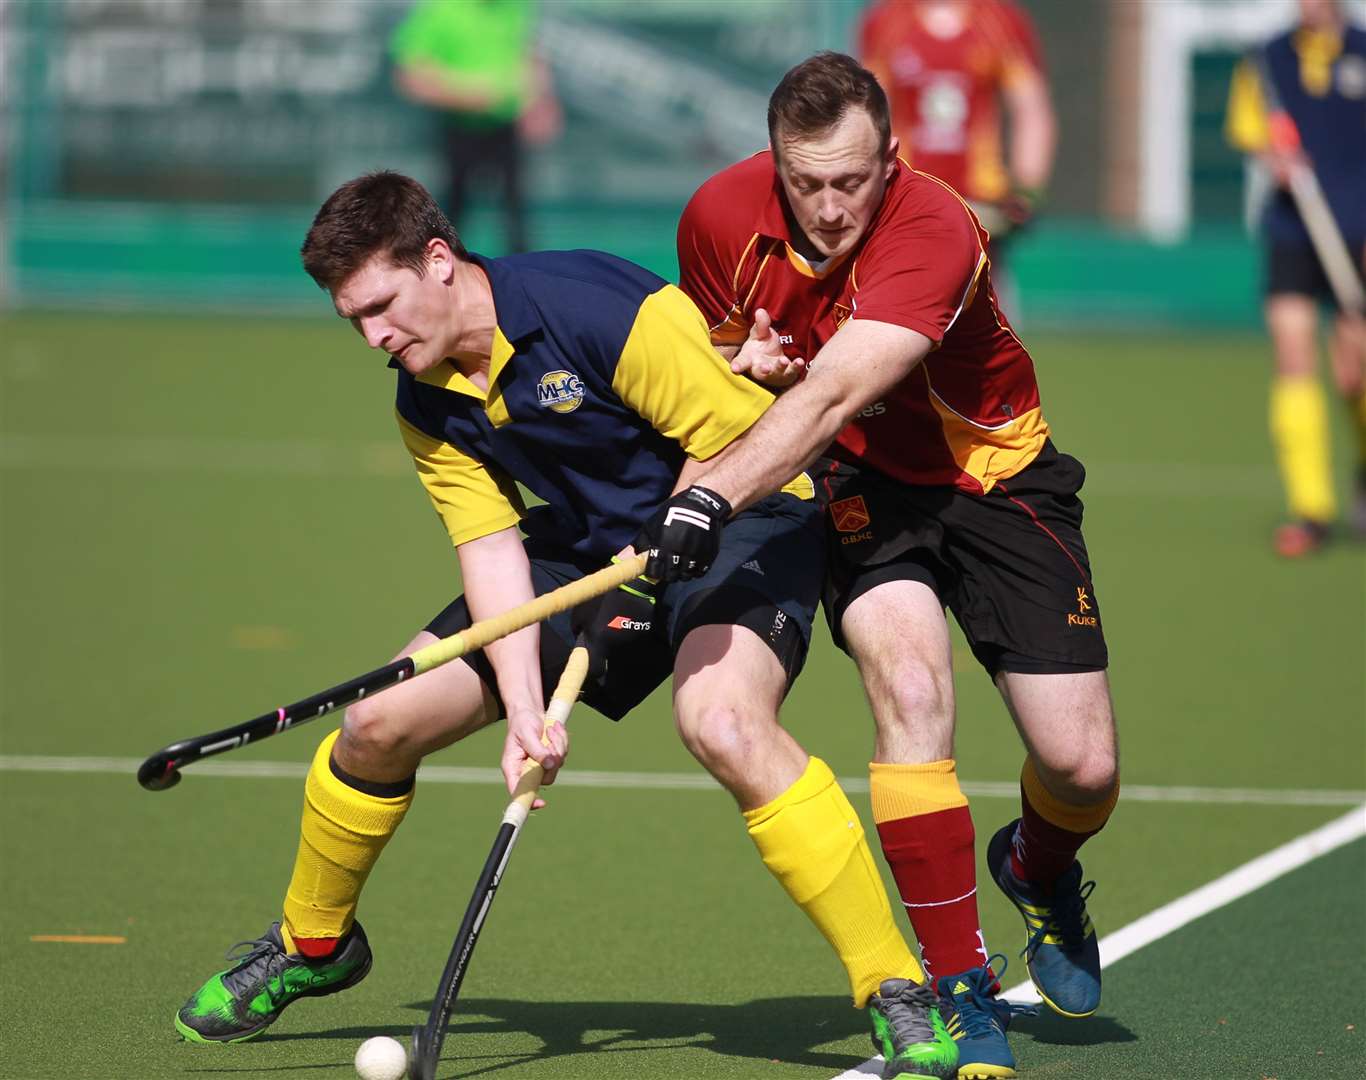 Sittingbourne Hockey Club have retained the traditional colours of Old Bordenians, pictured right in action against Maidstone Picture: John Westhrop